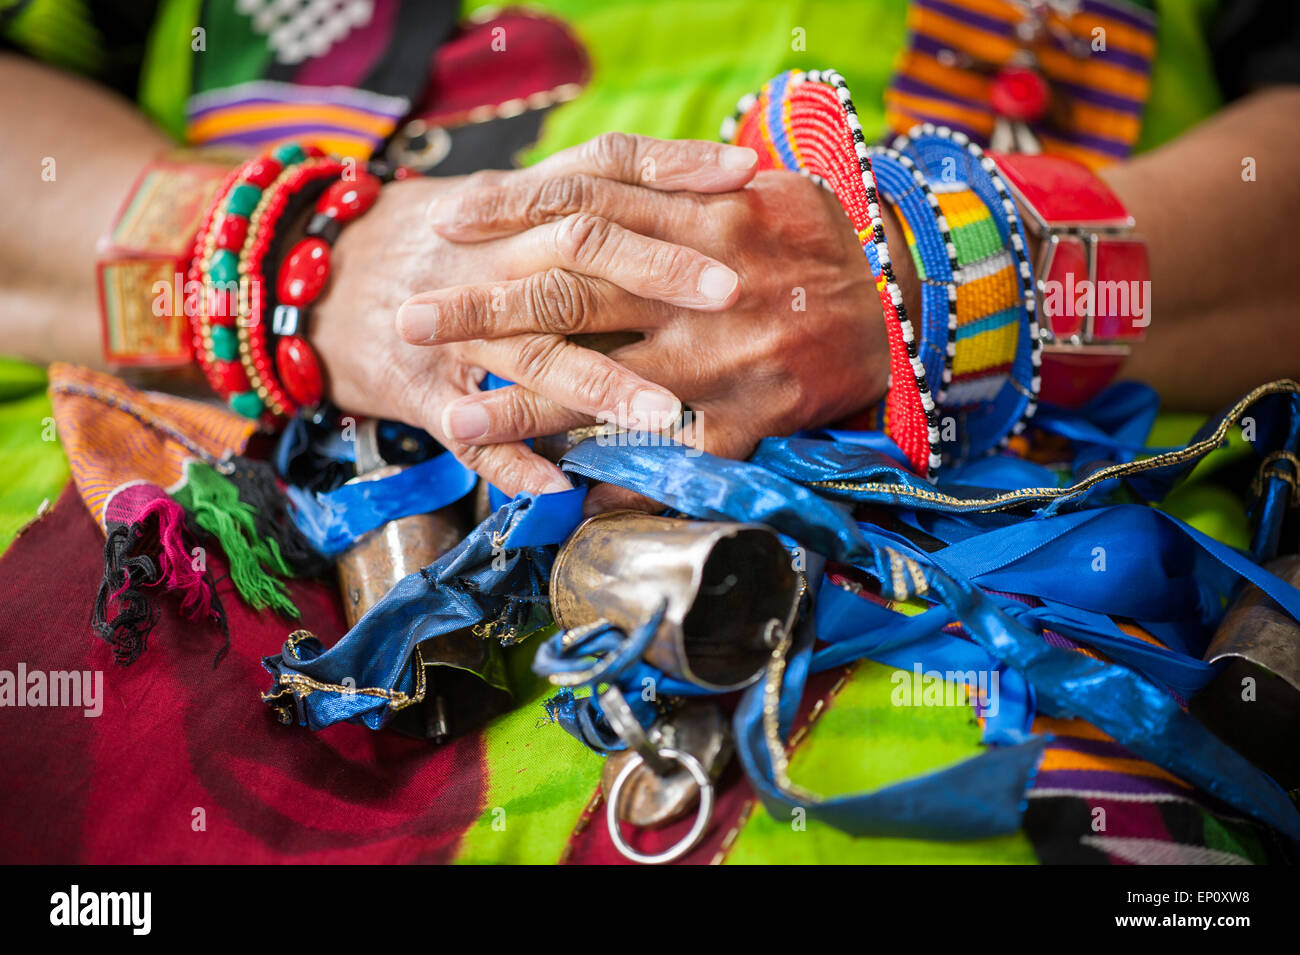 African American woman's hands wearing colorful traditional clothes and bracelets in Baltimore, Maryland. On her lap are bells a Stock Photo